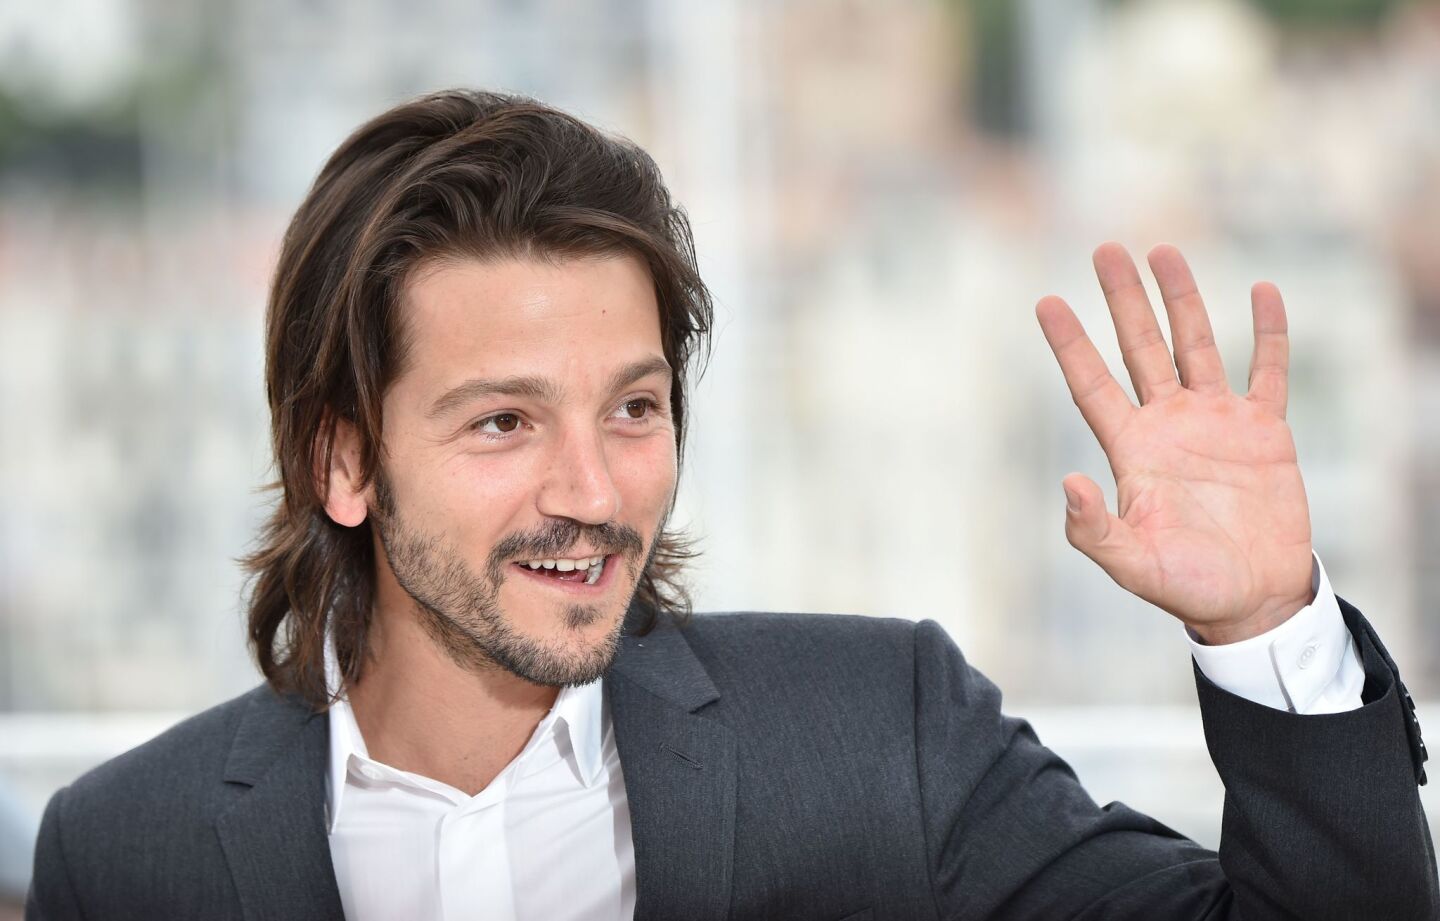 Diego Luna, a member of the Un Certain Regard jury, waves during a Cannes Film Festival photocall on May 13.